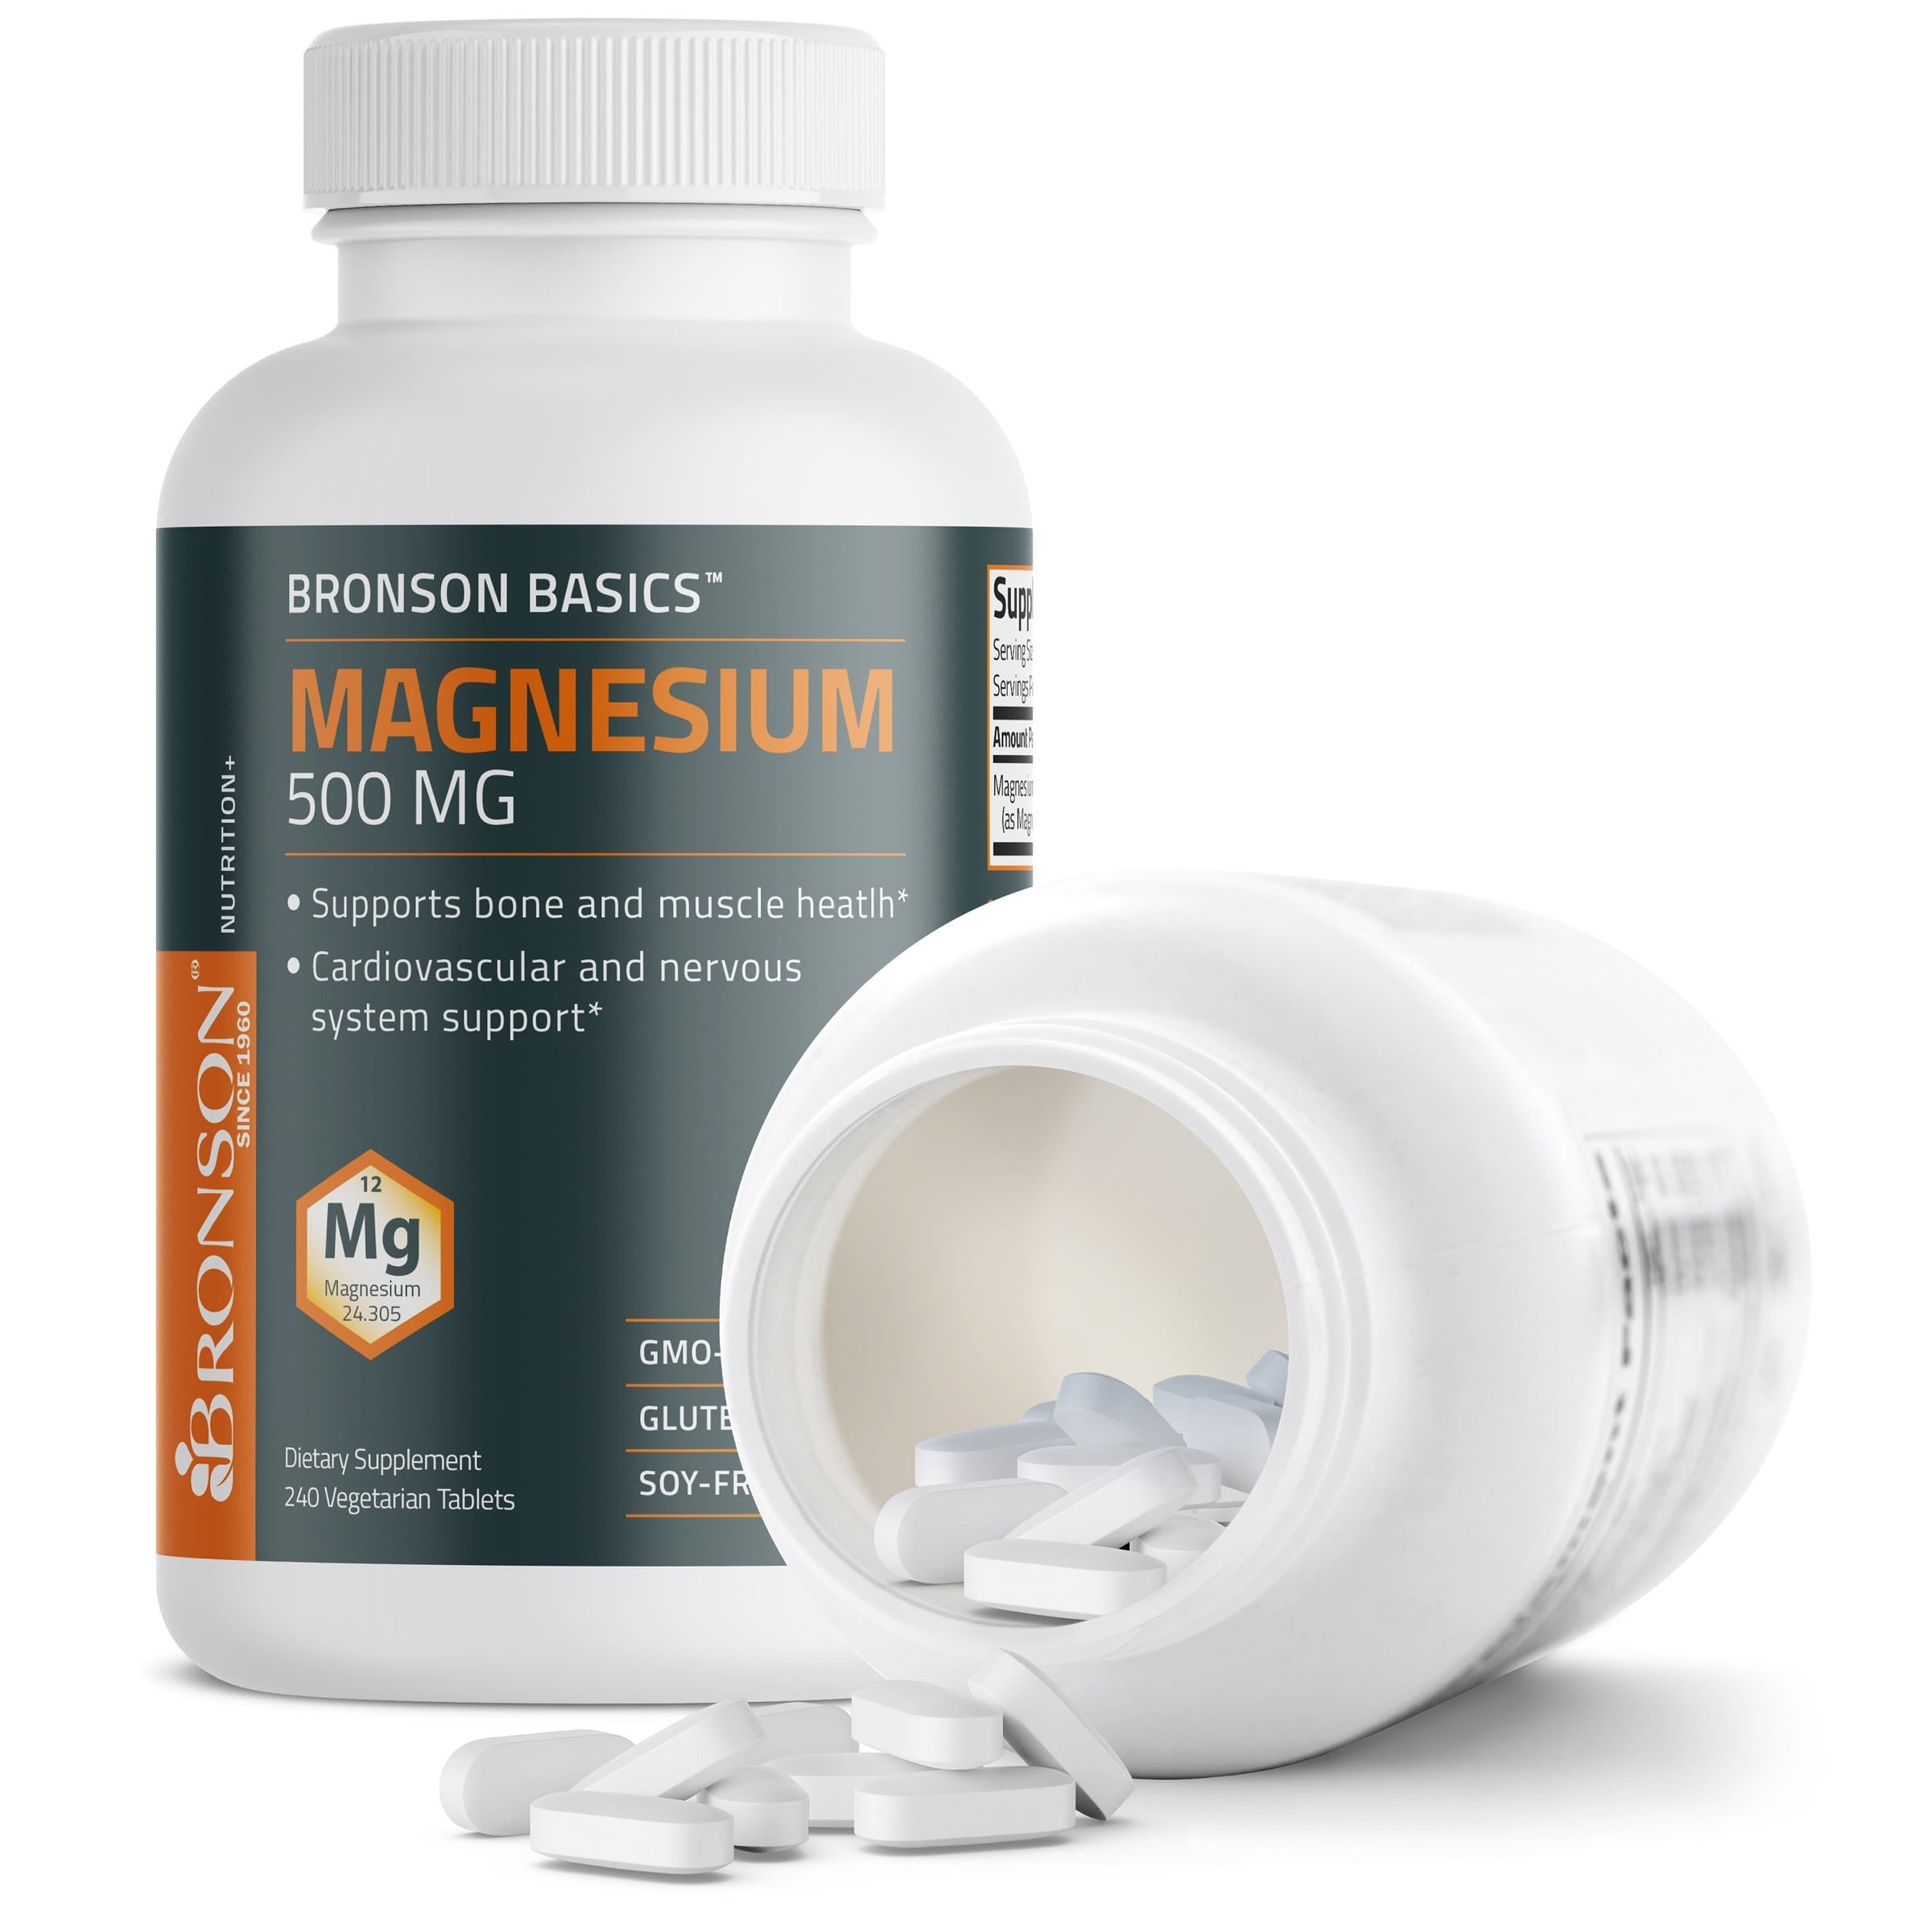 Magnesium 500 MG view 5 of 6